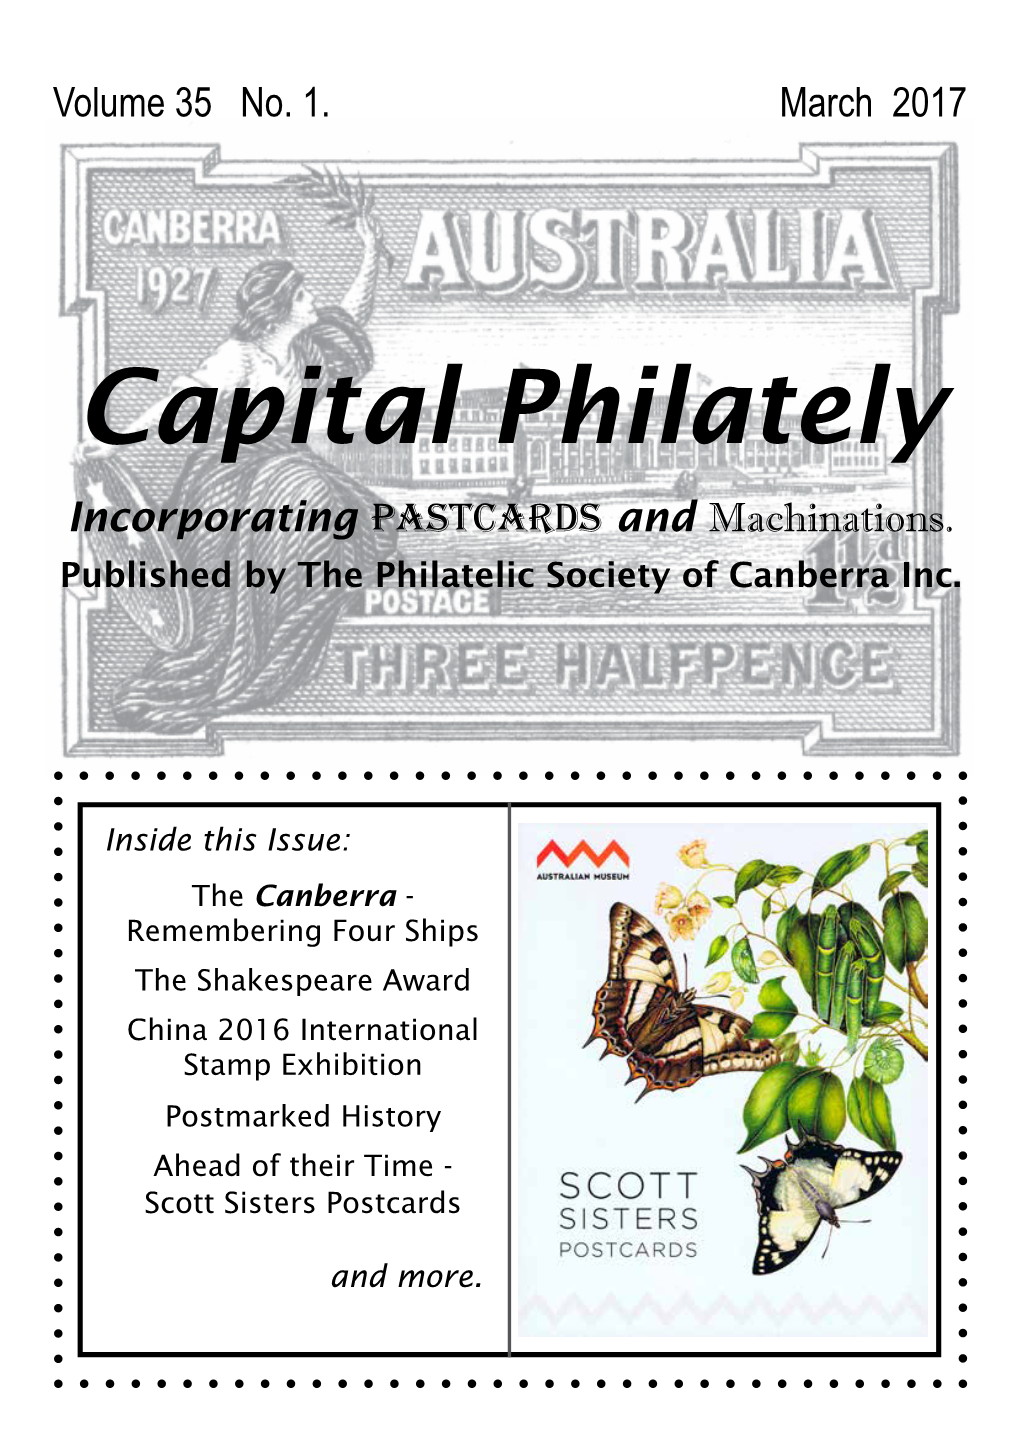 Capital Philately Incorporating Pastcards and Machinations